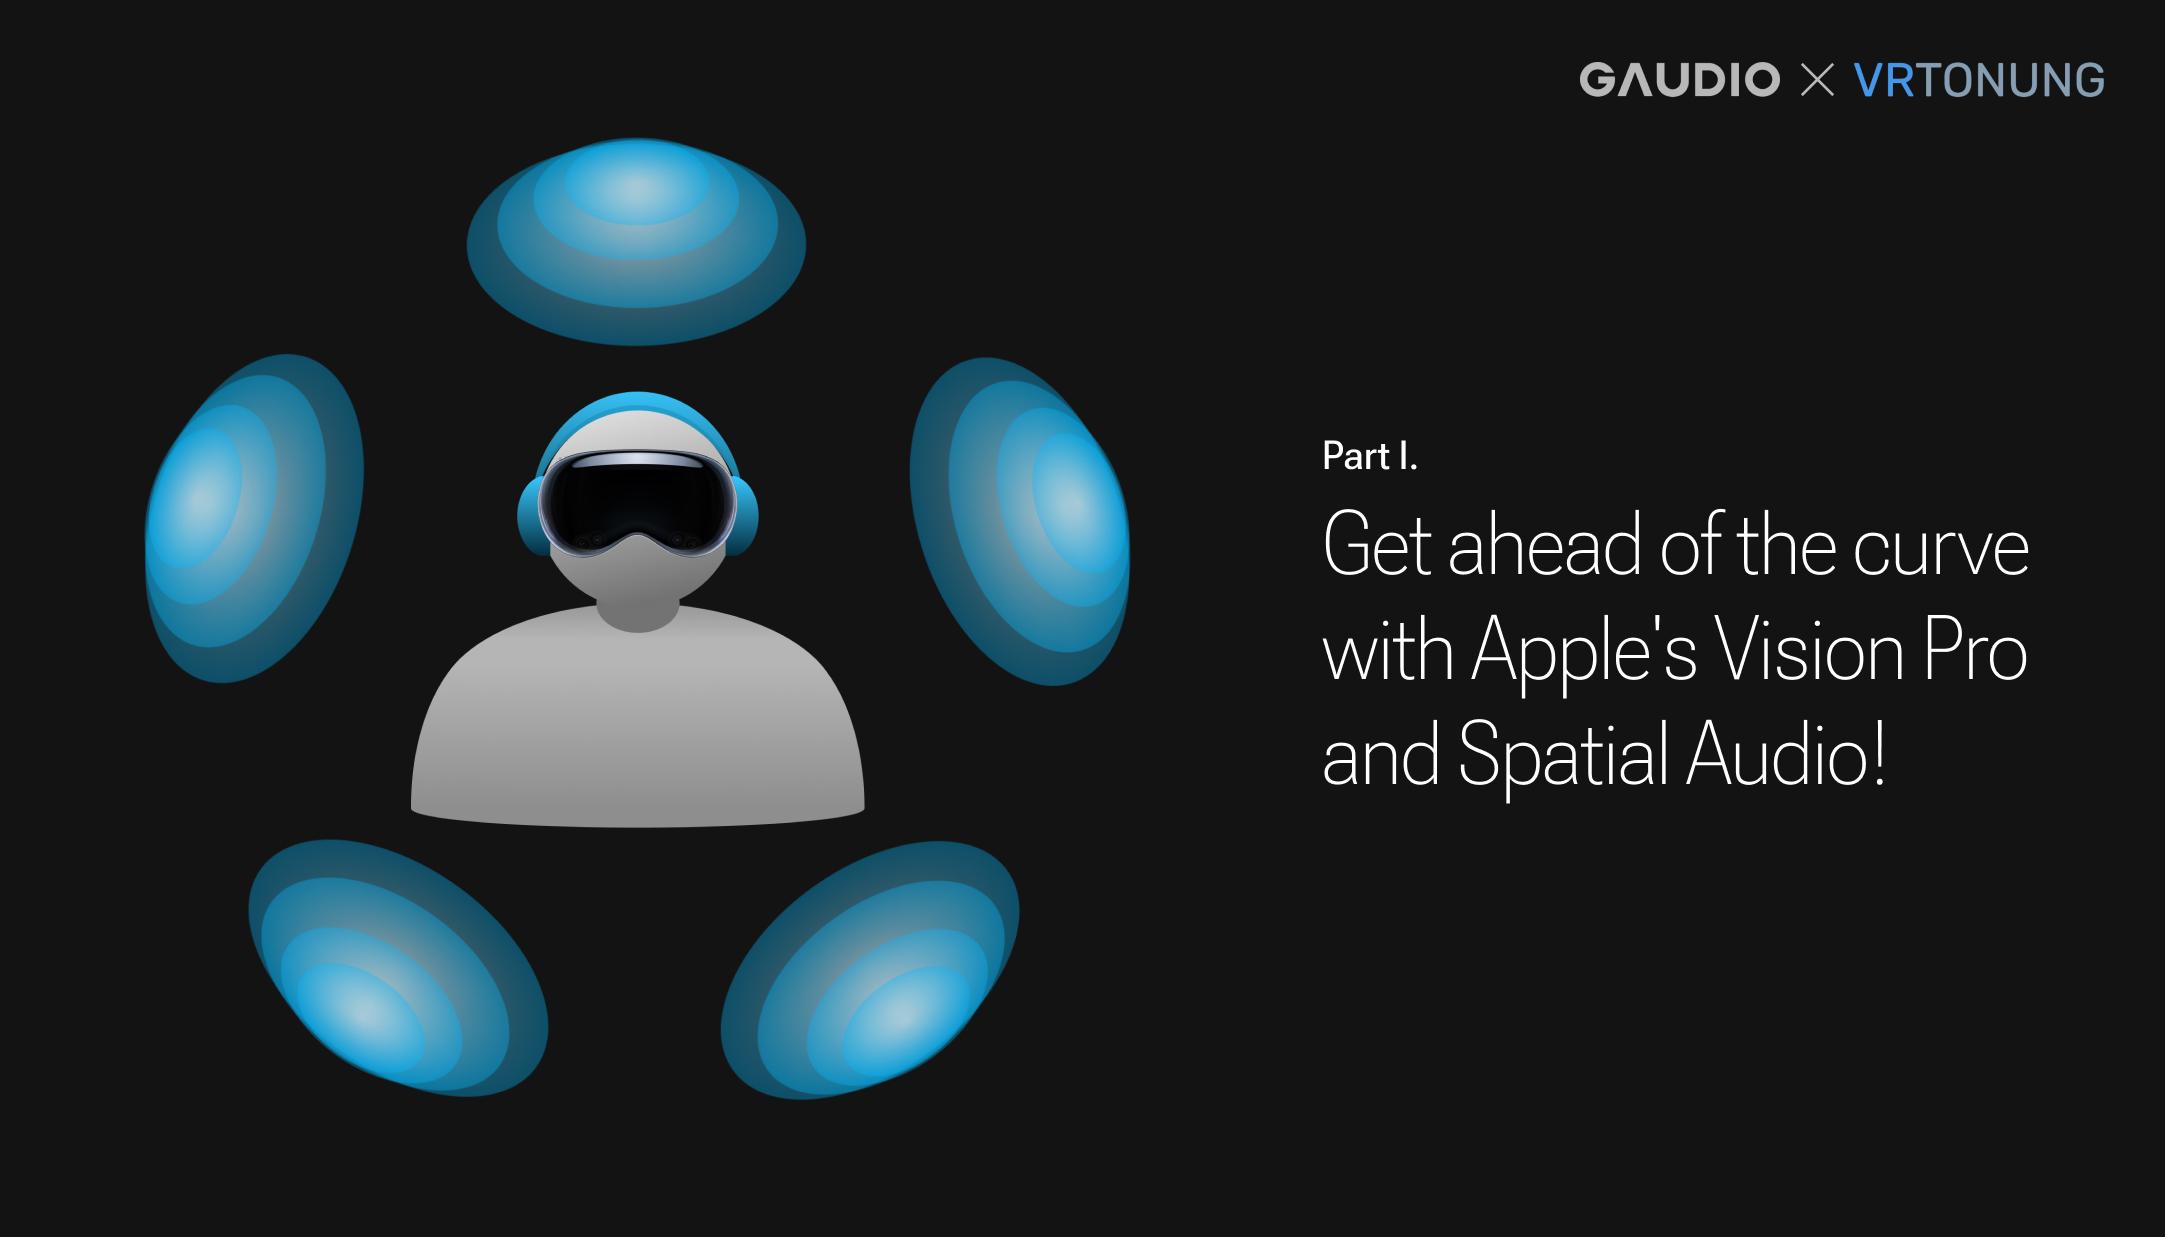 Get ahead of the curve with Apple's Vision Pro and spatial audio! [Part1]